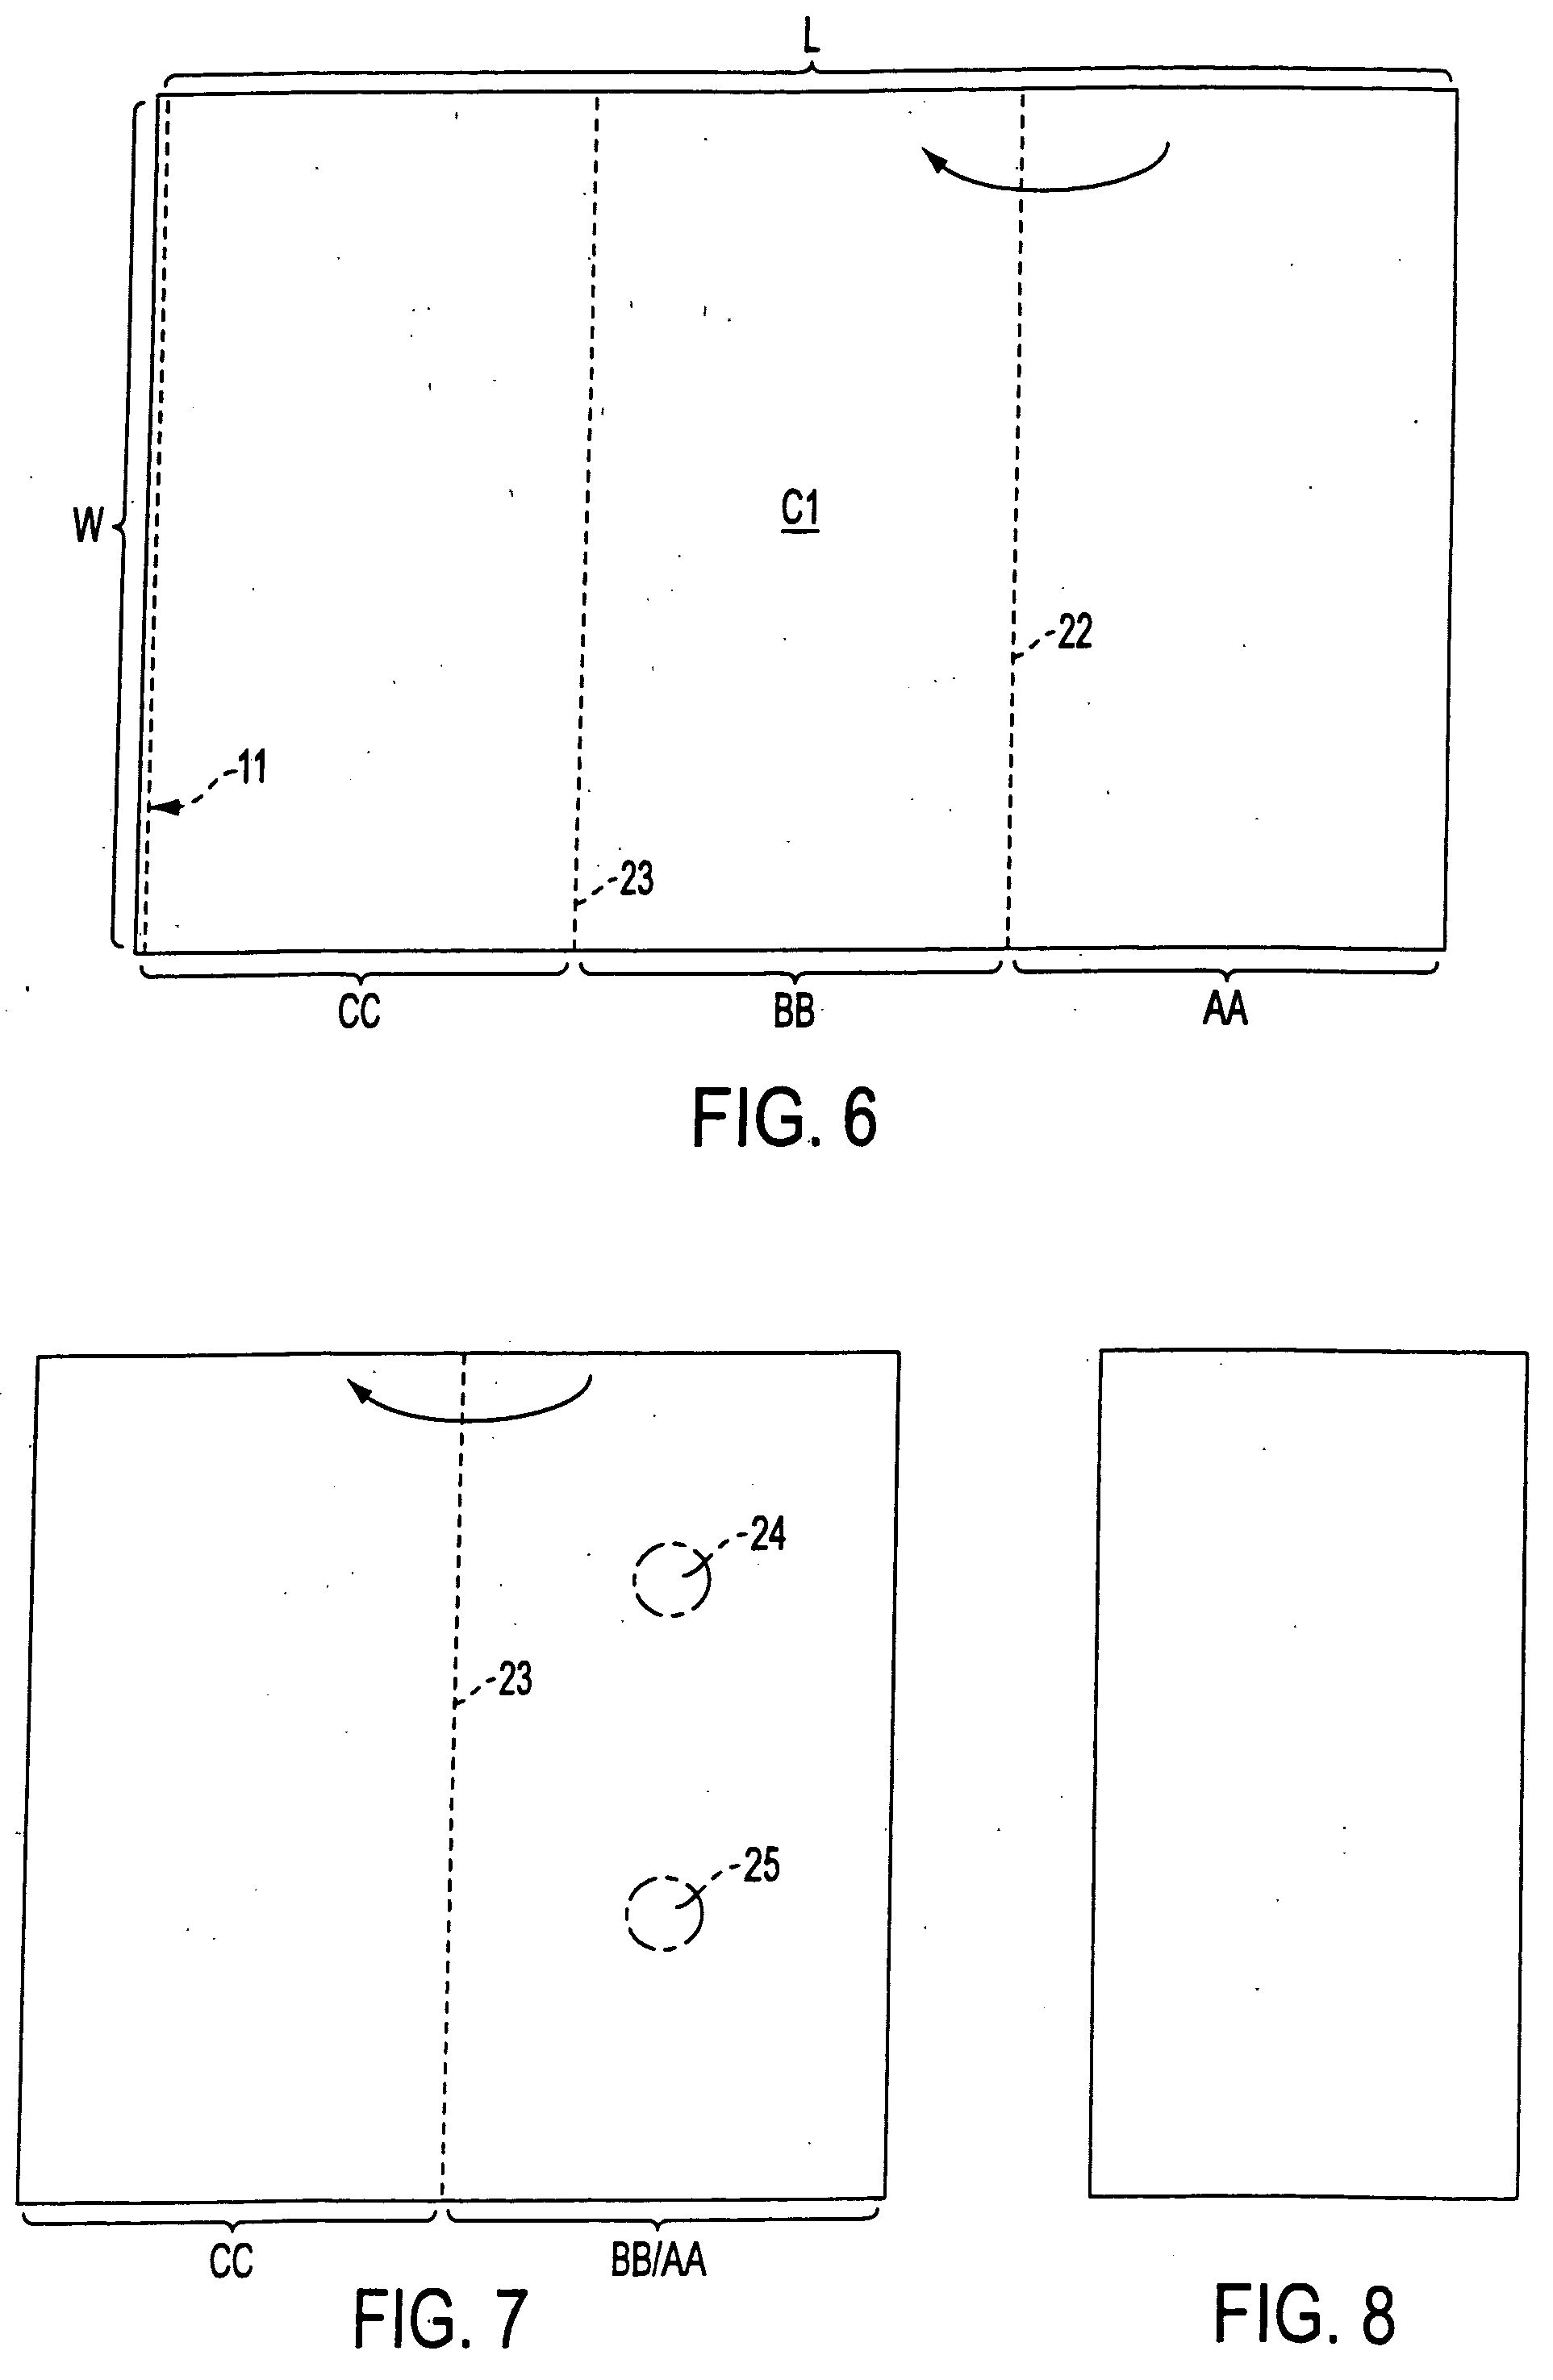 Method of manufacturing a single booklet